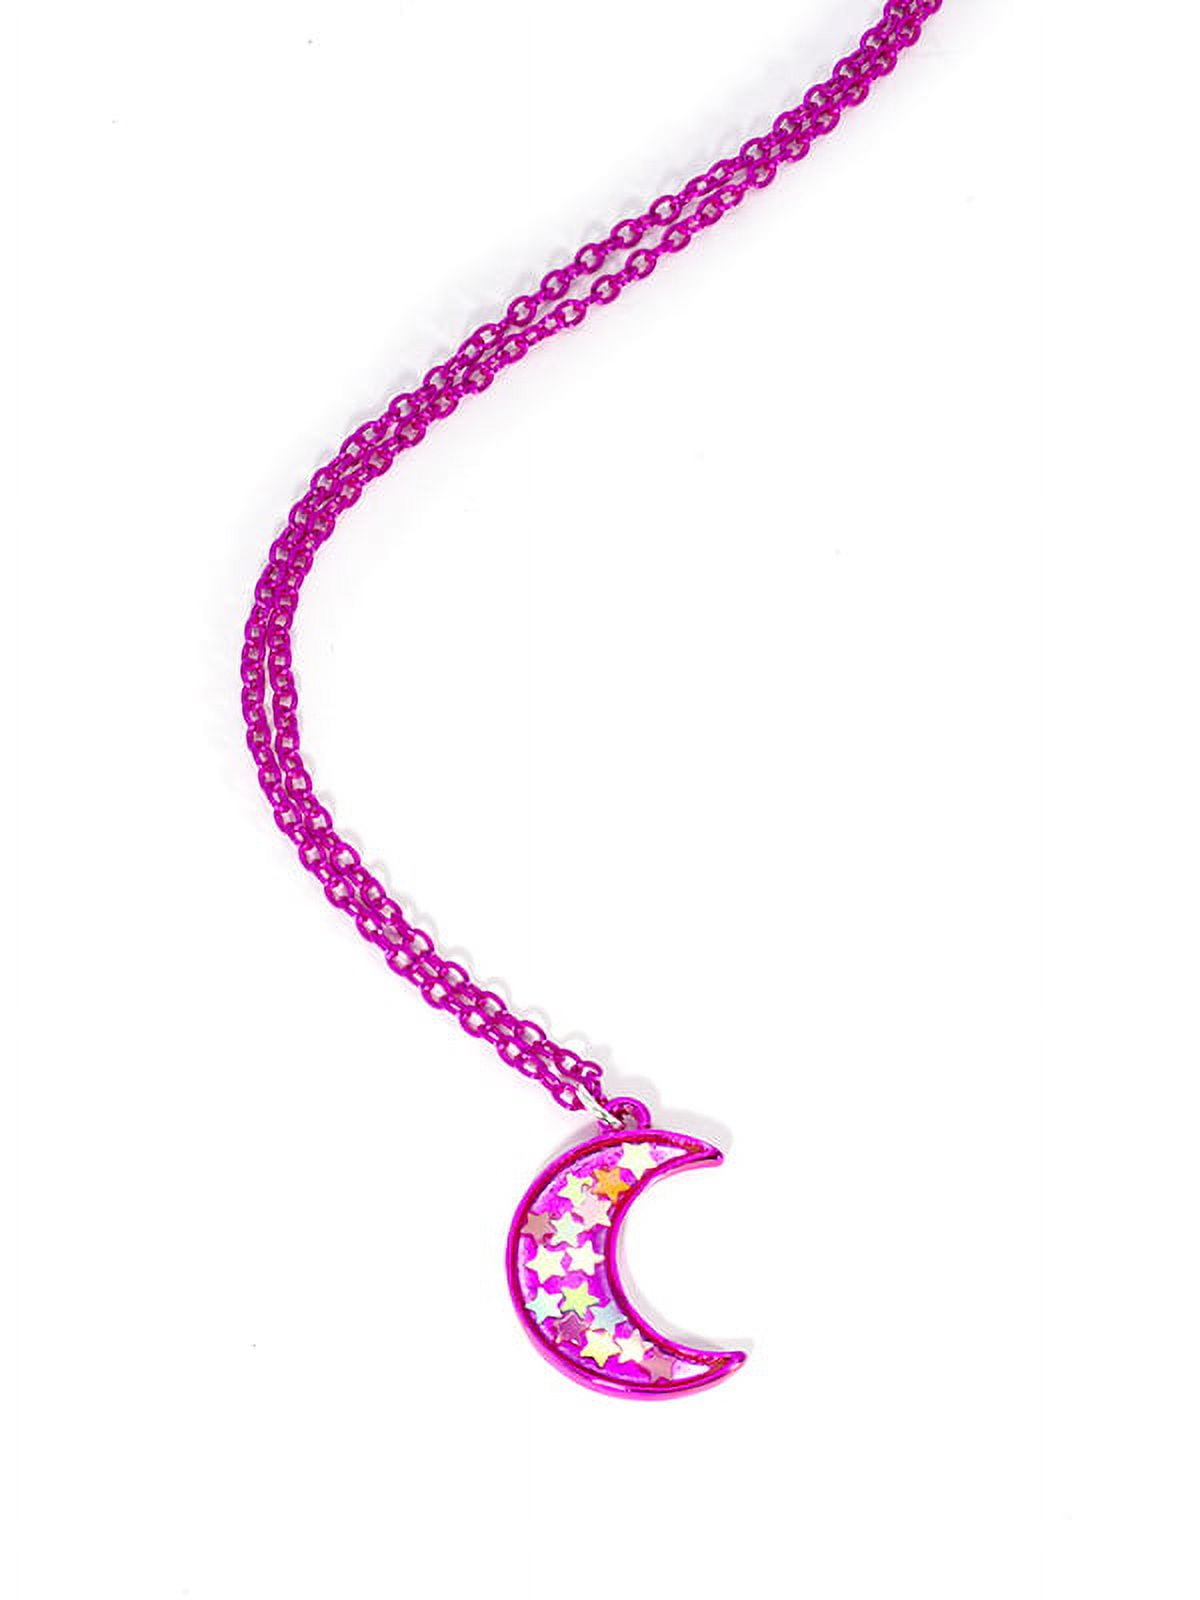 Best Friends Moon Necklace Set, Jewelry for Girls – Chasing Fireflies